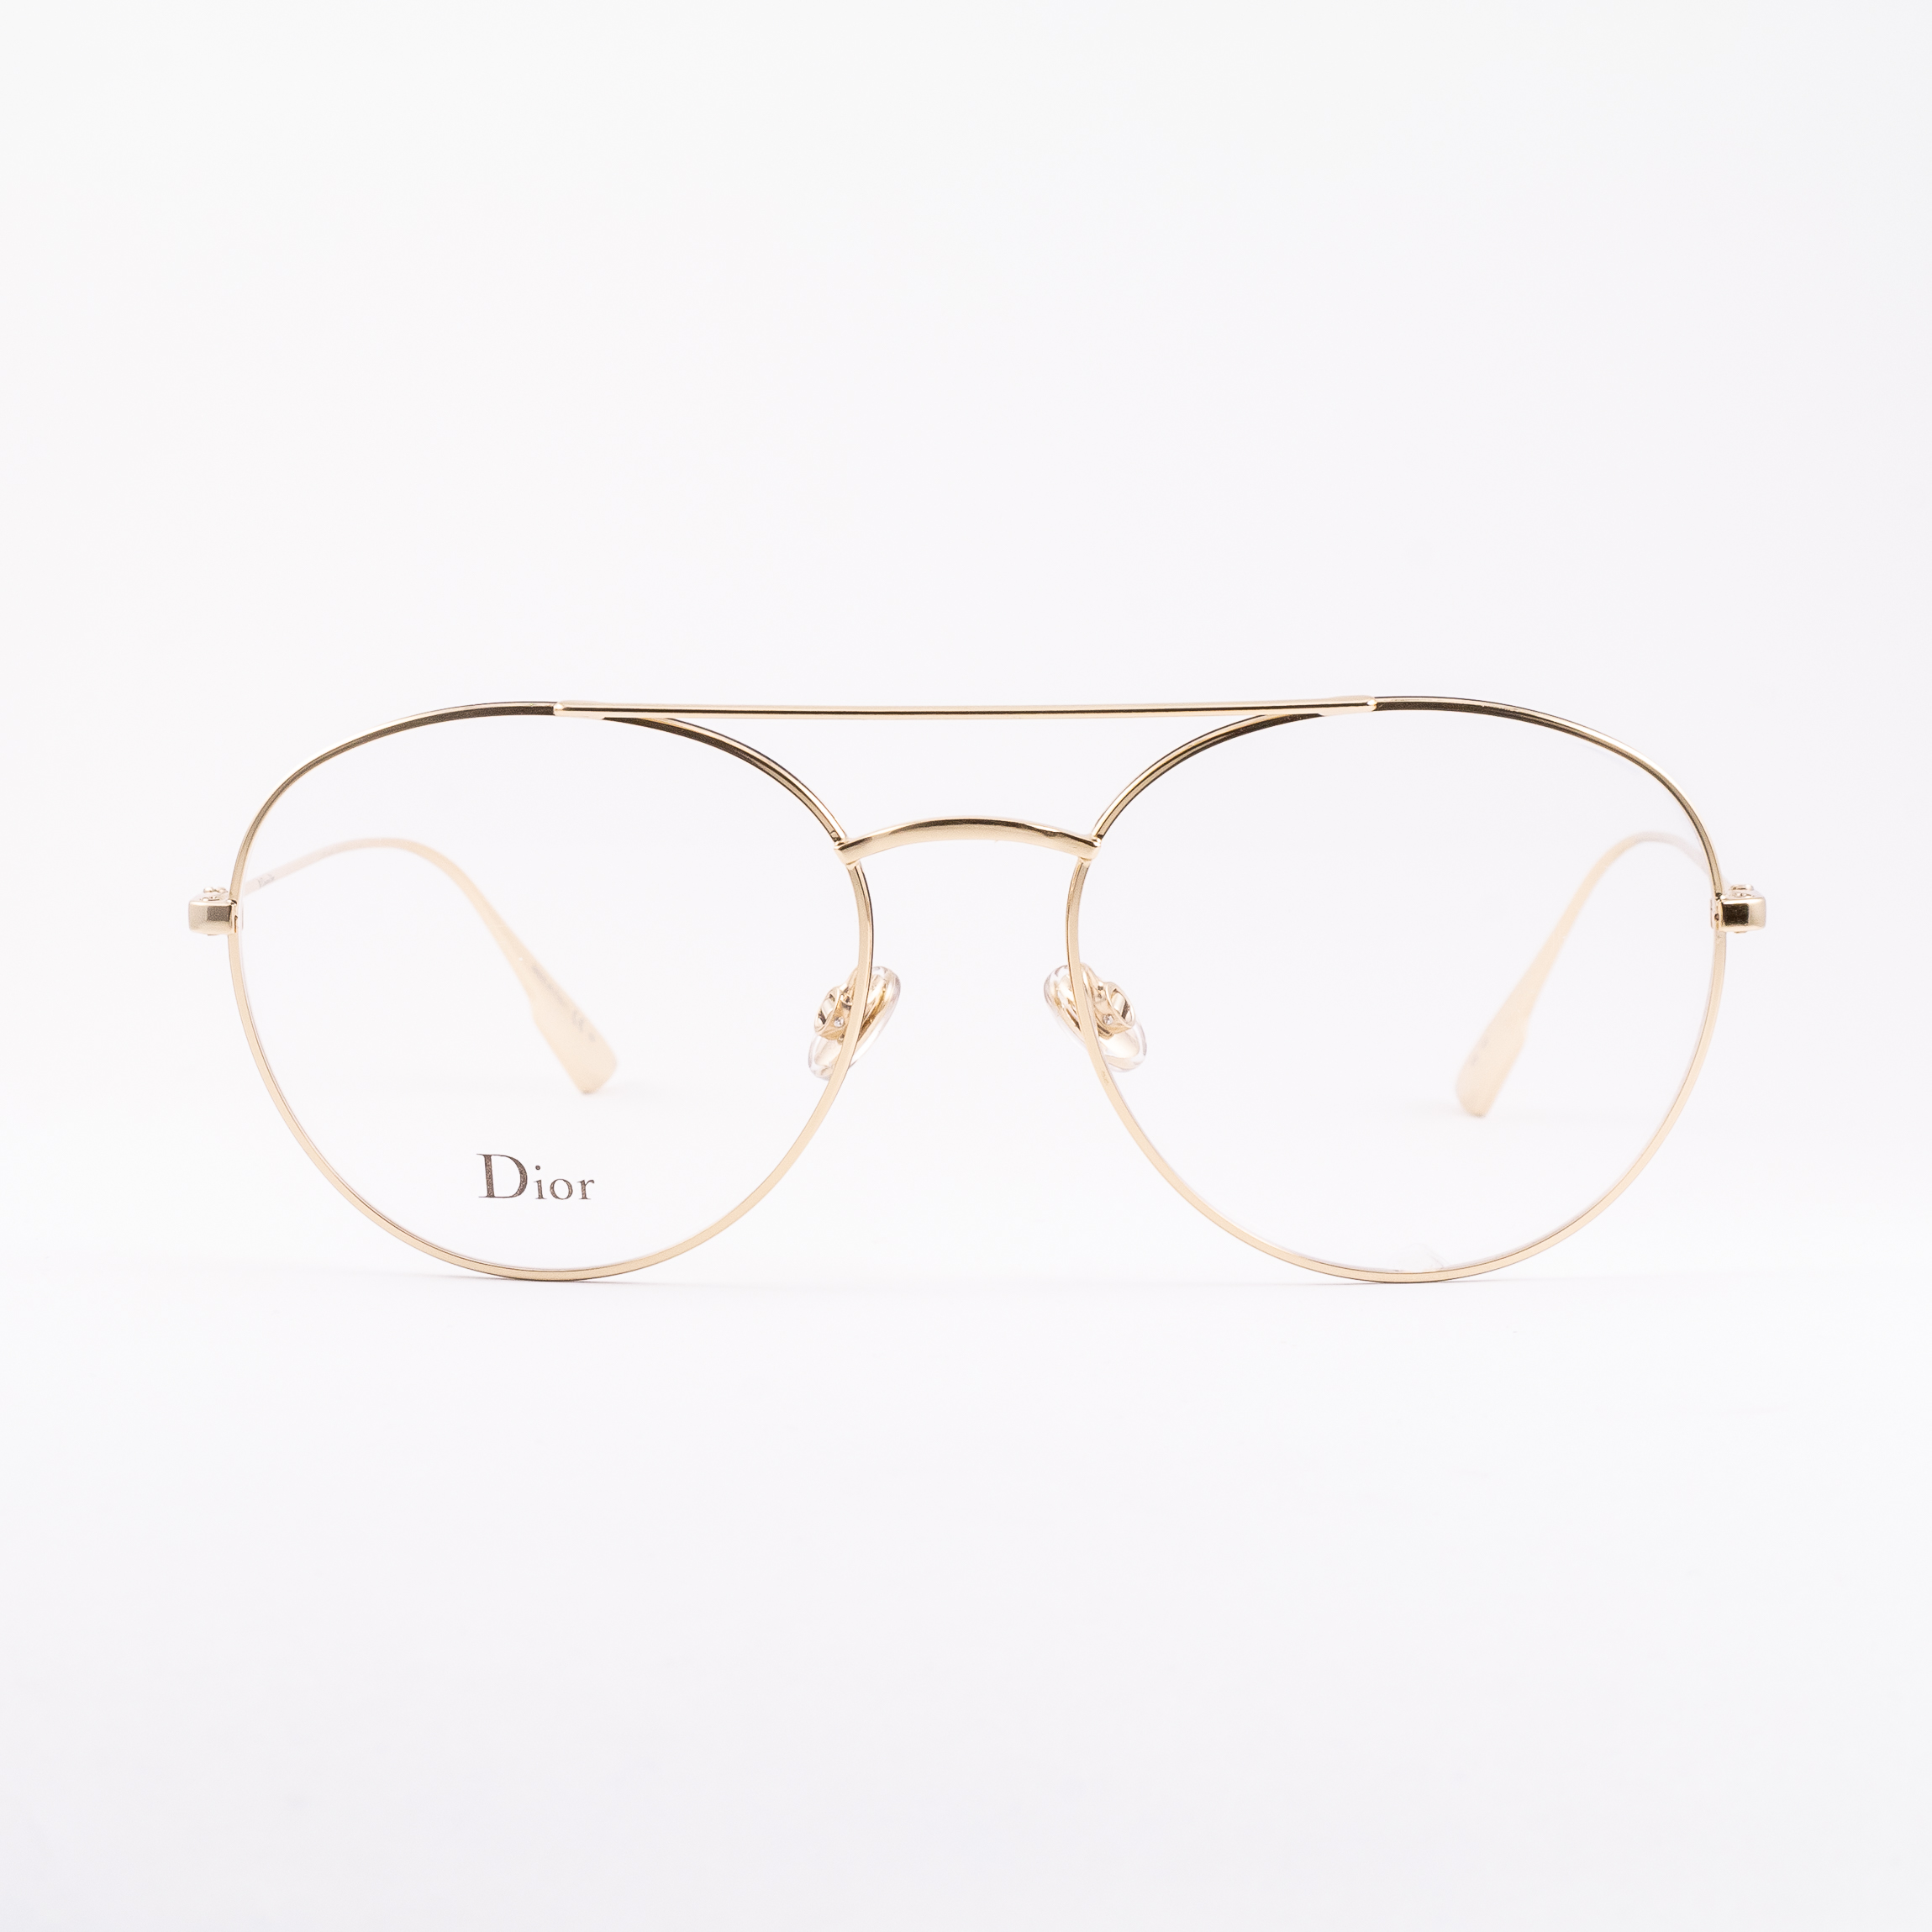 Dior Stellaire 02 Hotsell SAVE 52  oxforddownscom